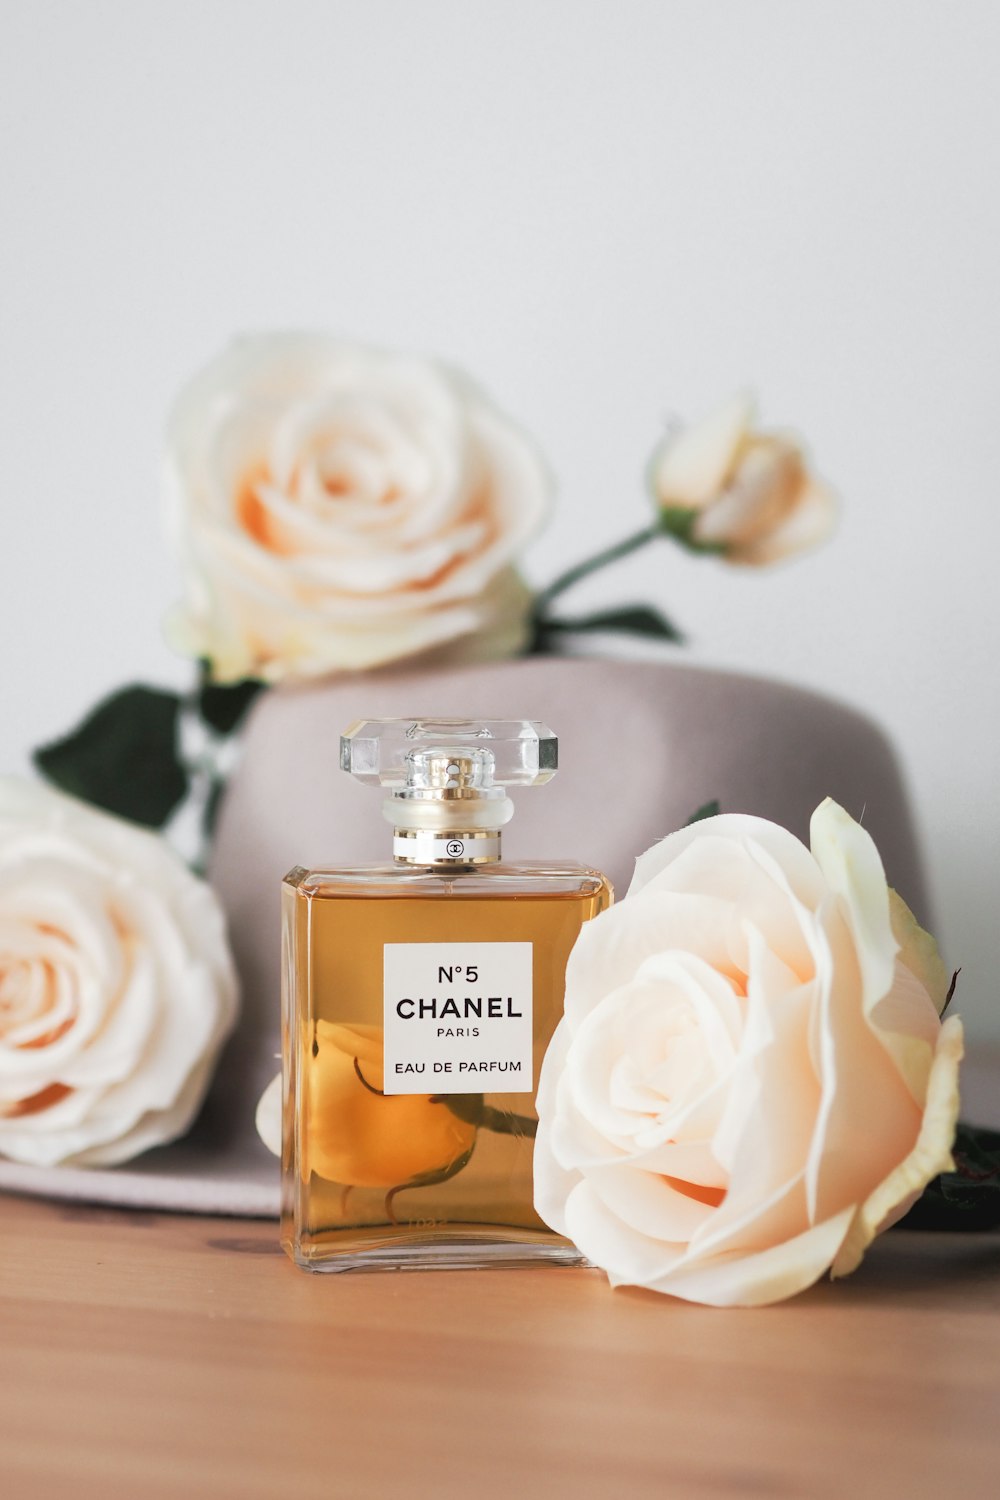 A bottle of chanel perfume next to a hat and flowers photo – Free Grey  Image on Unsplash